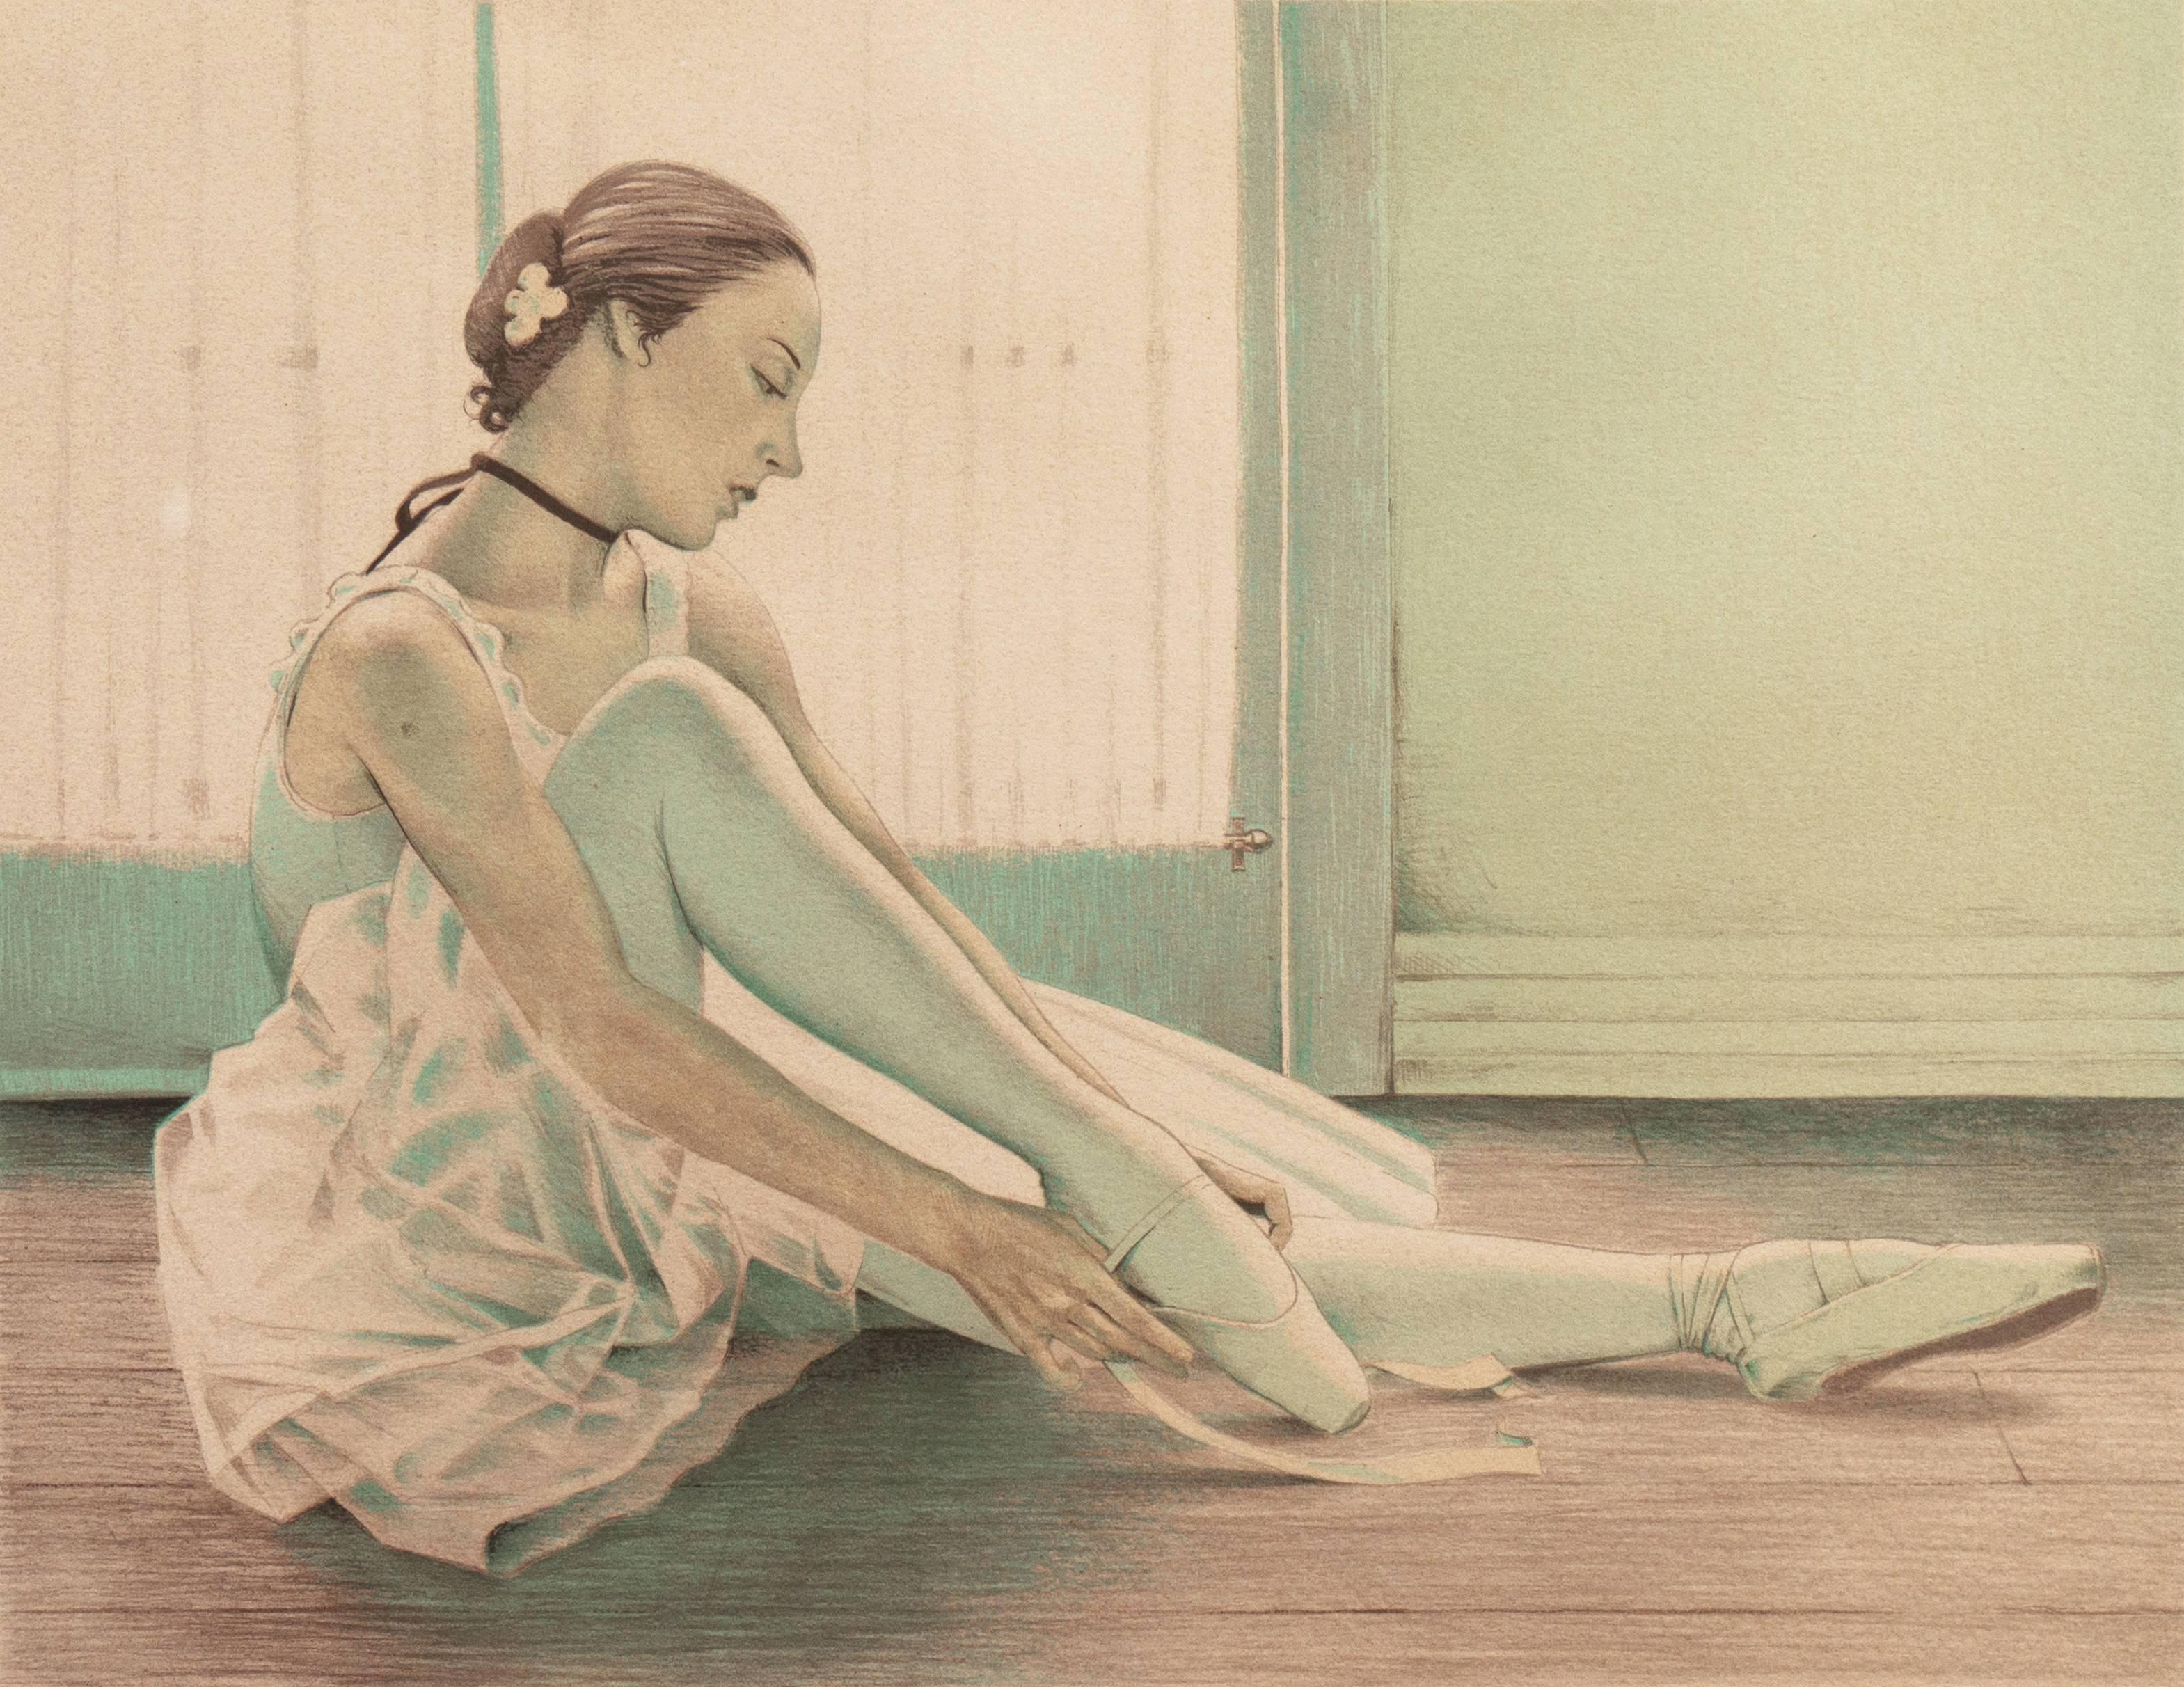 Louis Russomanno Interior Print - 'Young Ballerina', American Impressionist, National Academy of Design, New York